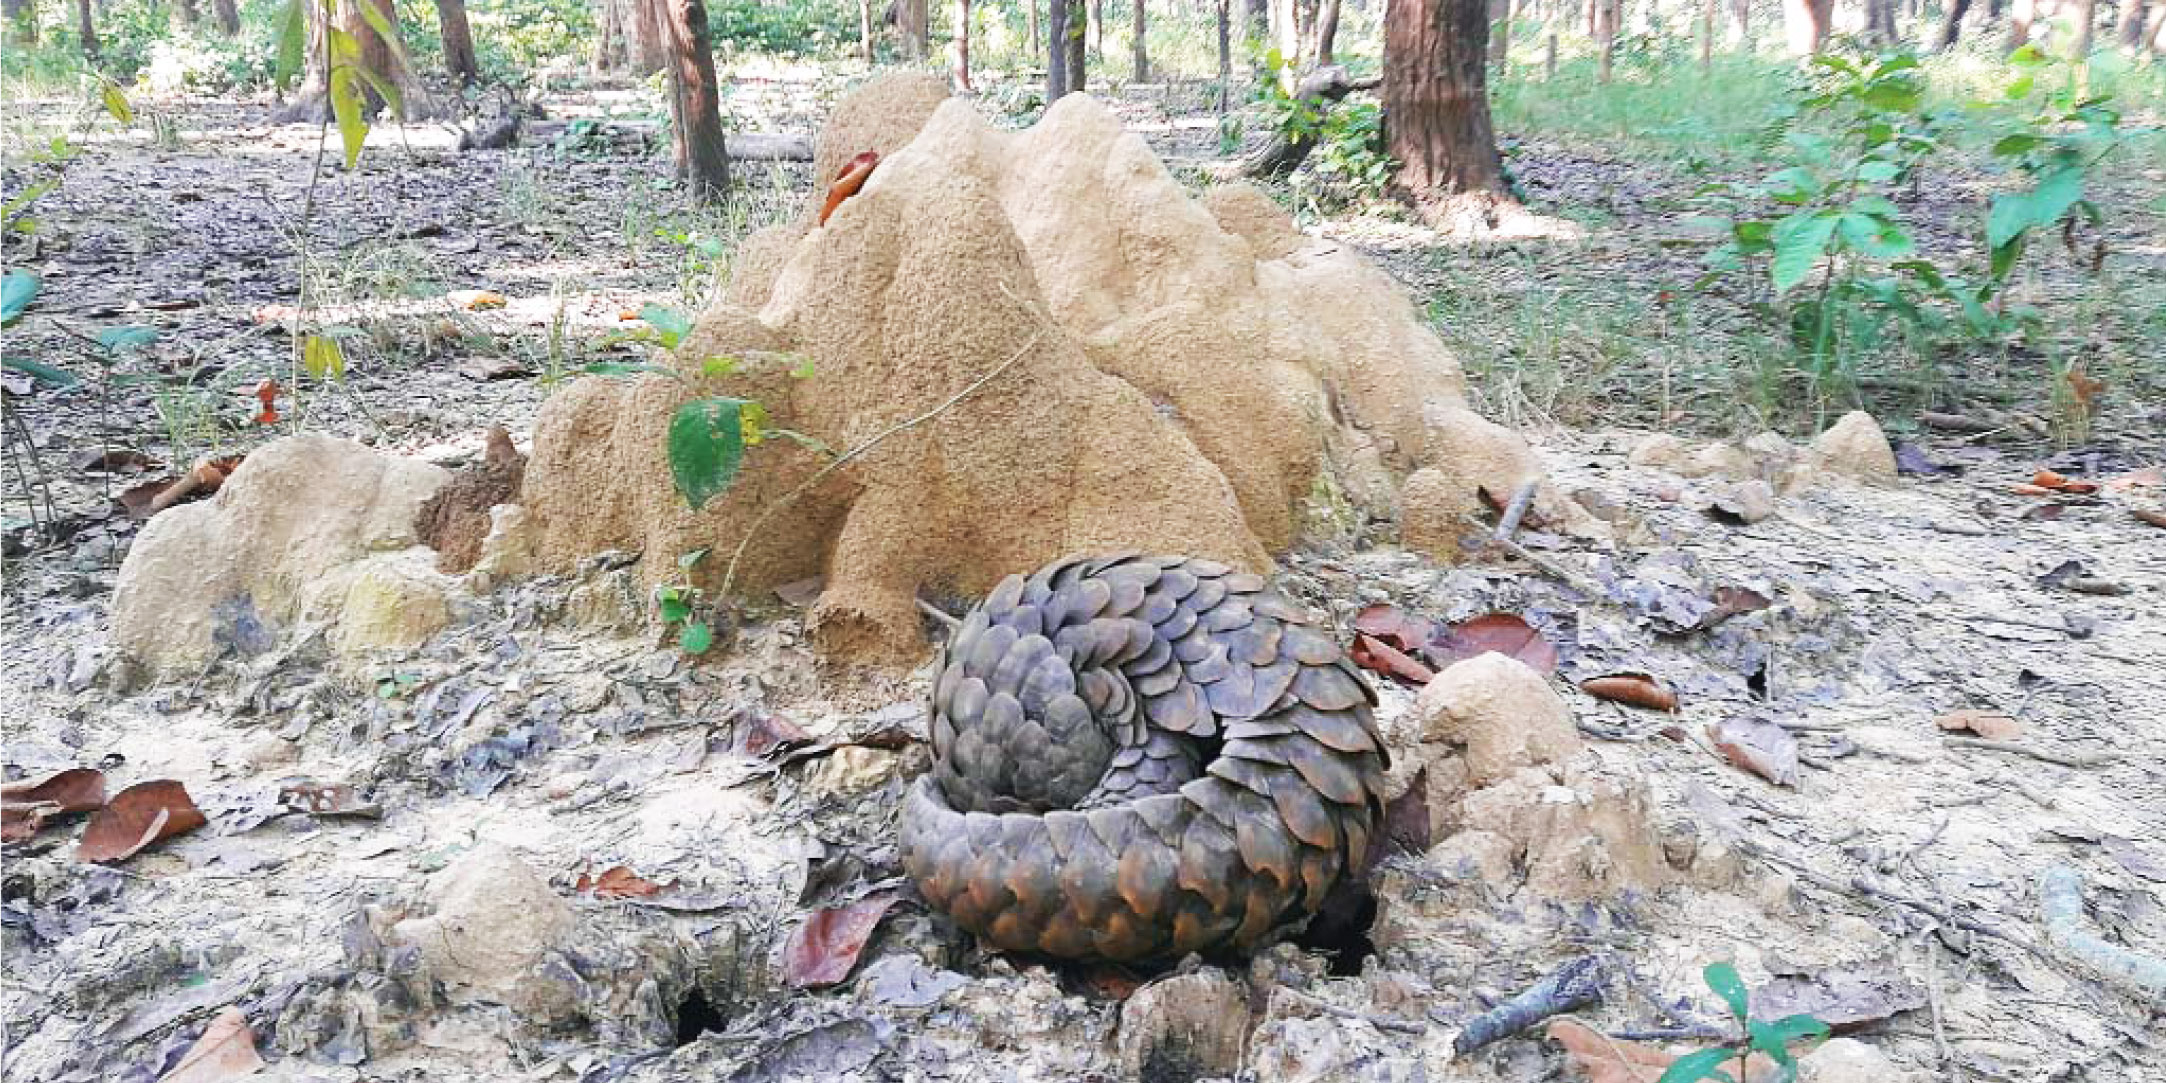 Challenges galore in pangolin conservation